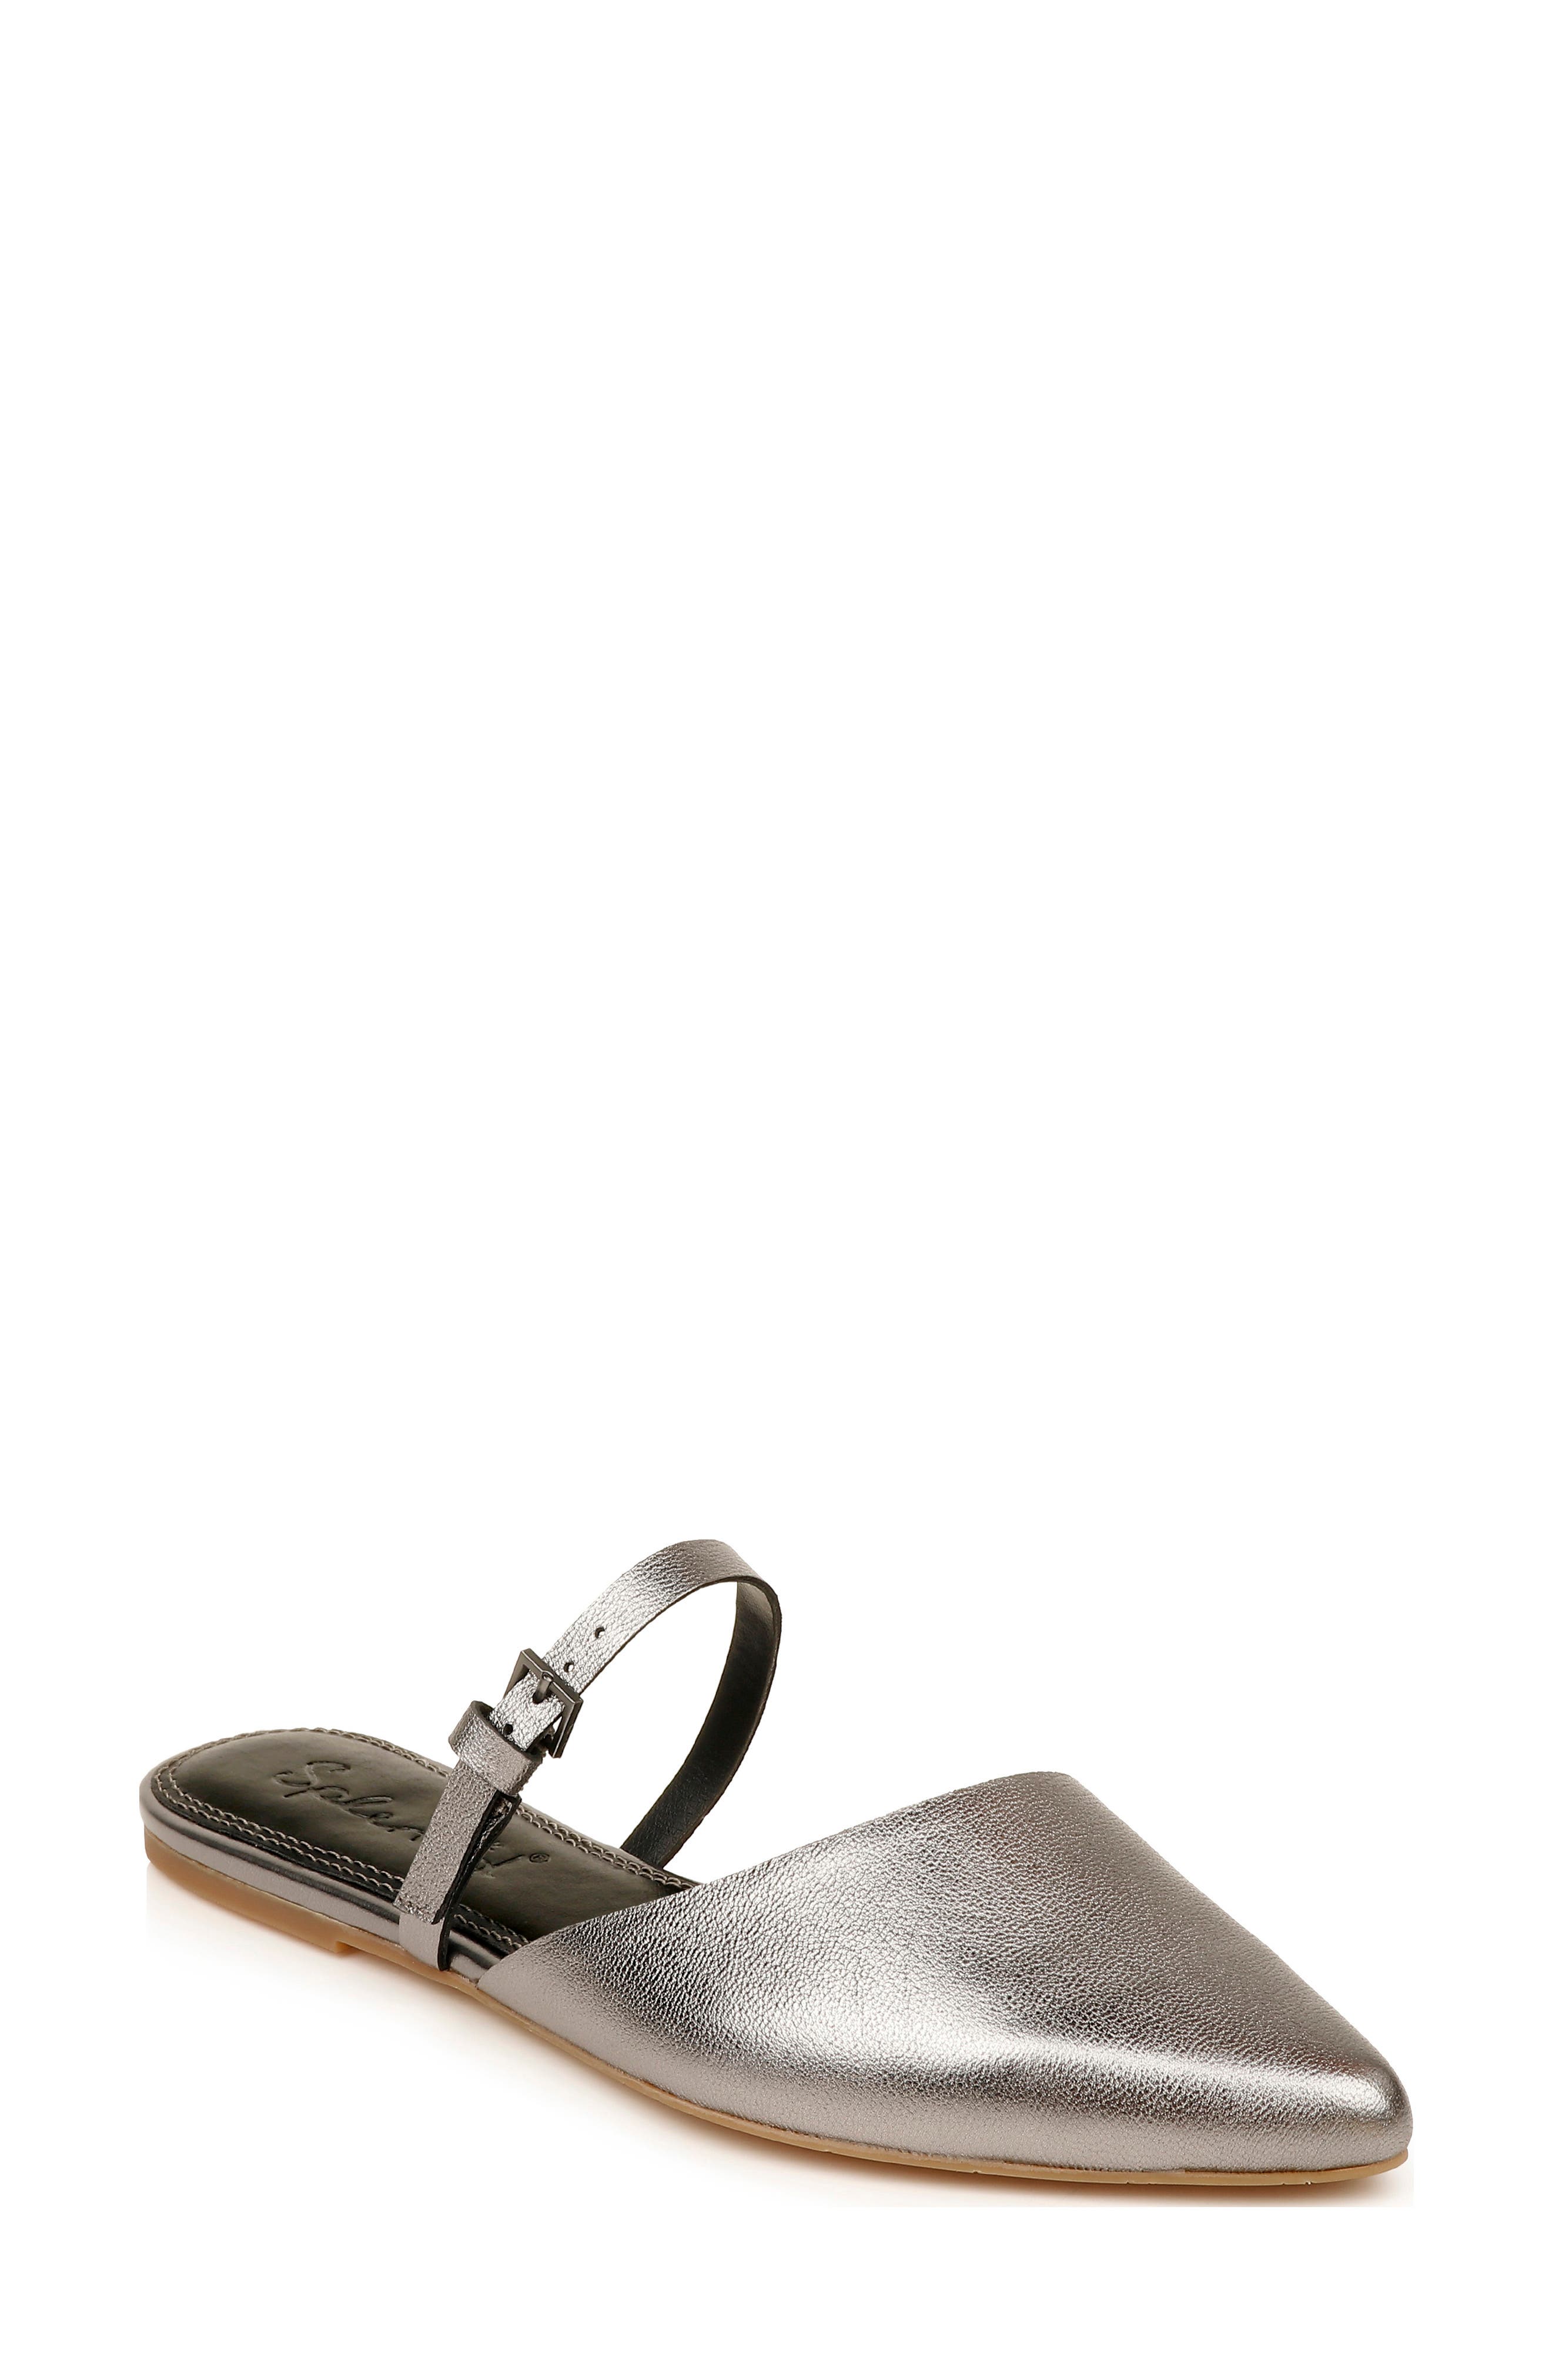 silver mules nordstrom